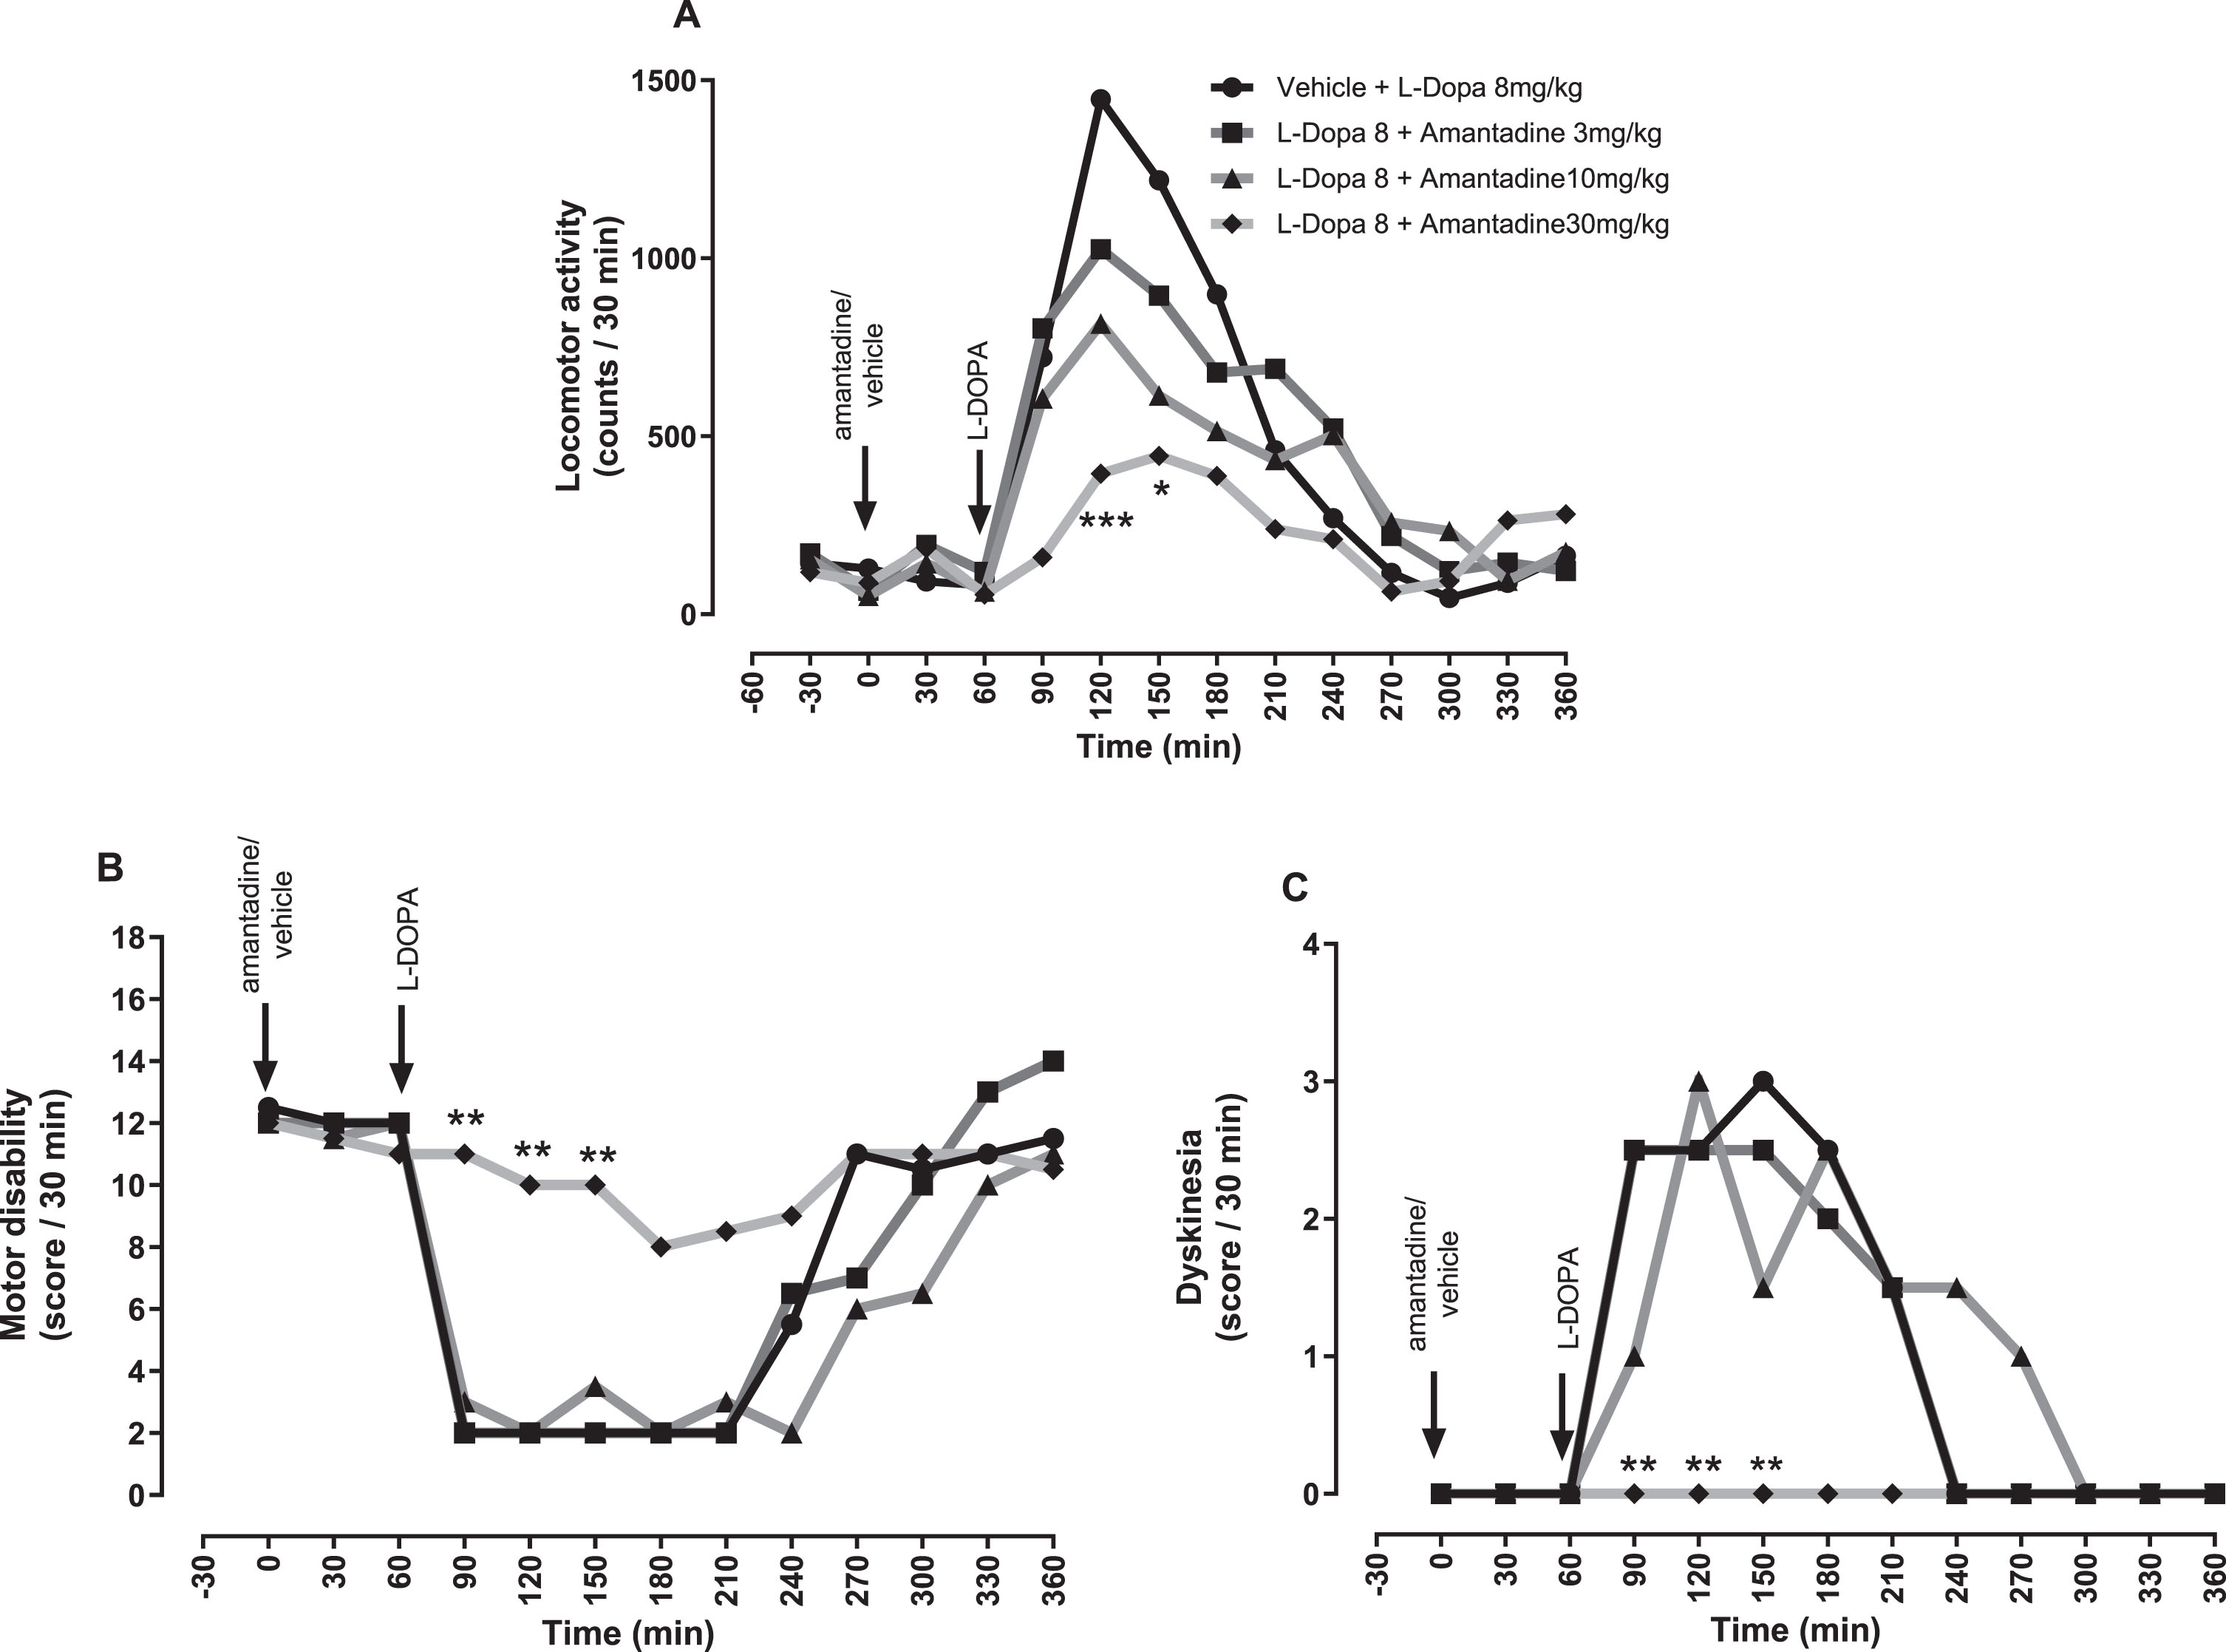 The NMDA receptor antagonist, amantadine reverses established L-DOPA-induced dyskinesia in MPTP-treated marmosets at the expense of antiparkinsonian efficacy. (A) Locomotor activity, (B) Motor disability scores and (C) Dyskinesia scores per 30-min interval for a 6 h period post treatment with vehicle or amantadine (3, 10, and 30 mg/kg po), plus L-DOPA (8 mg/kg + benserazide (10 mg/kg) p.o.). Data are medians (n = 6). ***p < 0.001, **p < 0.01, and *p < 0.05 versus vehicle pre-treatment (two-way RM ANOVA with Bonferroni post-hoc test).